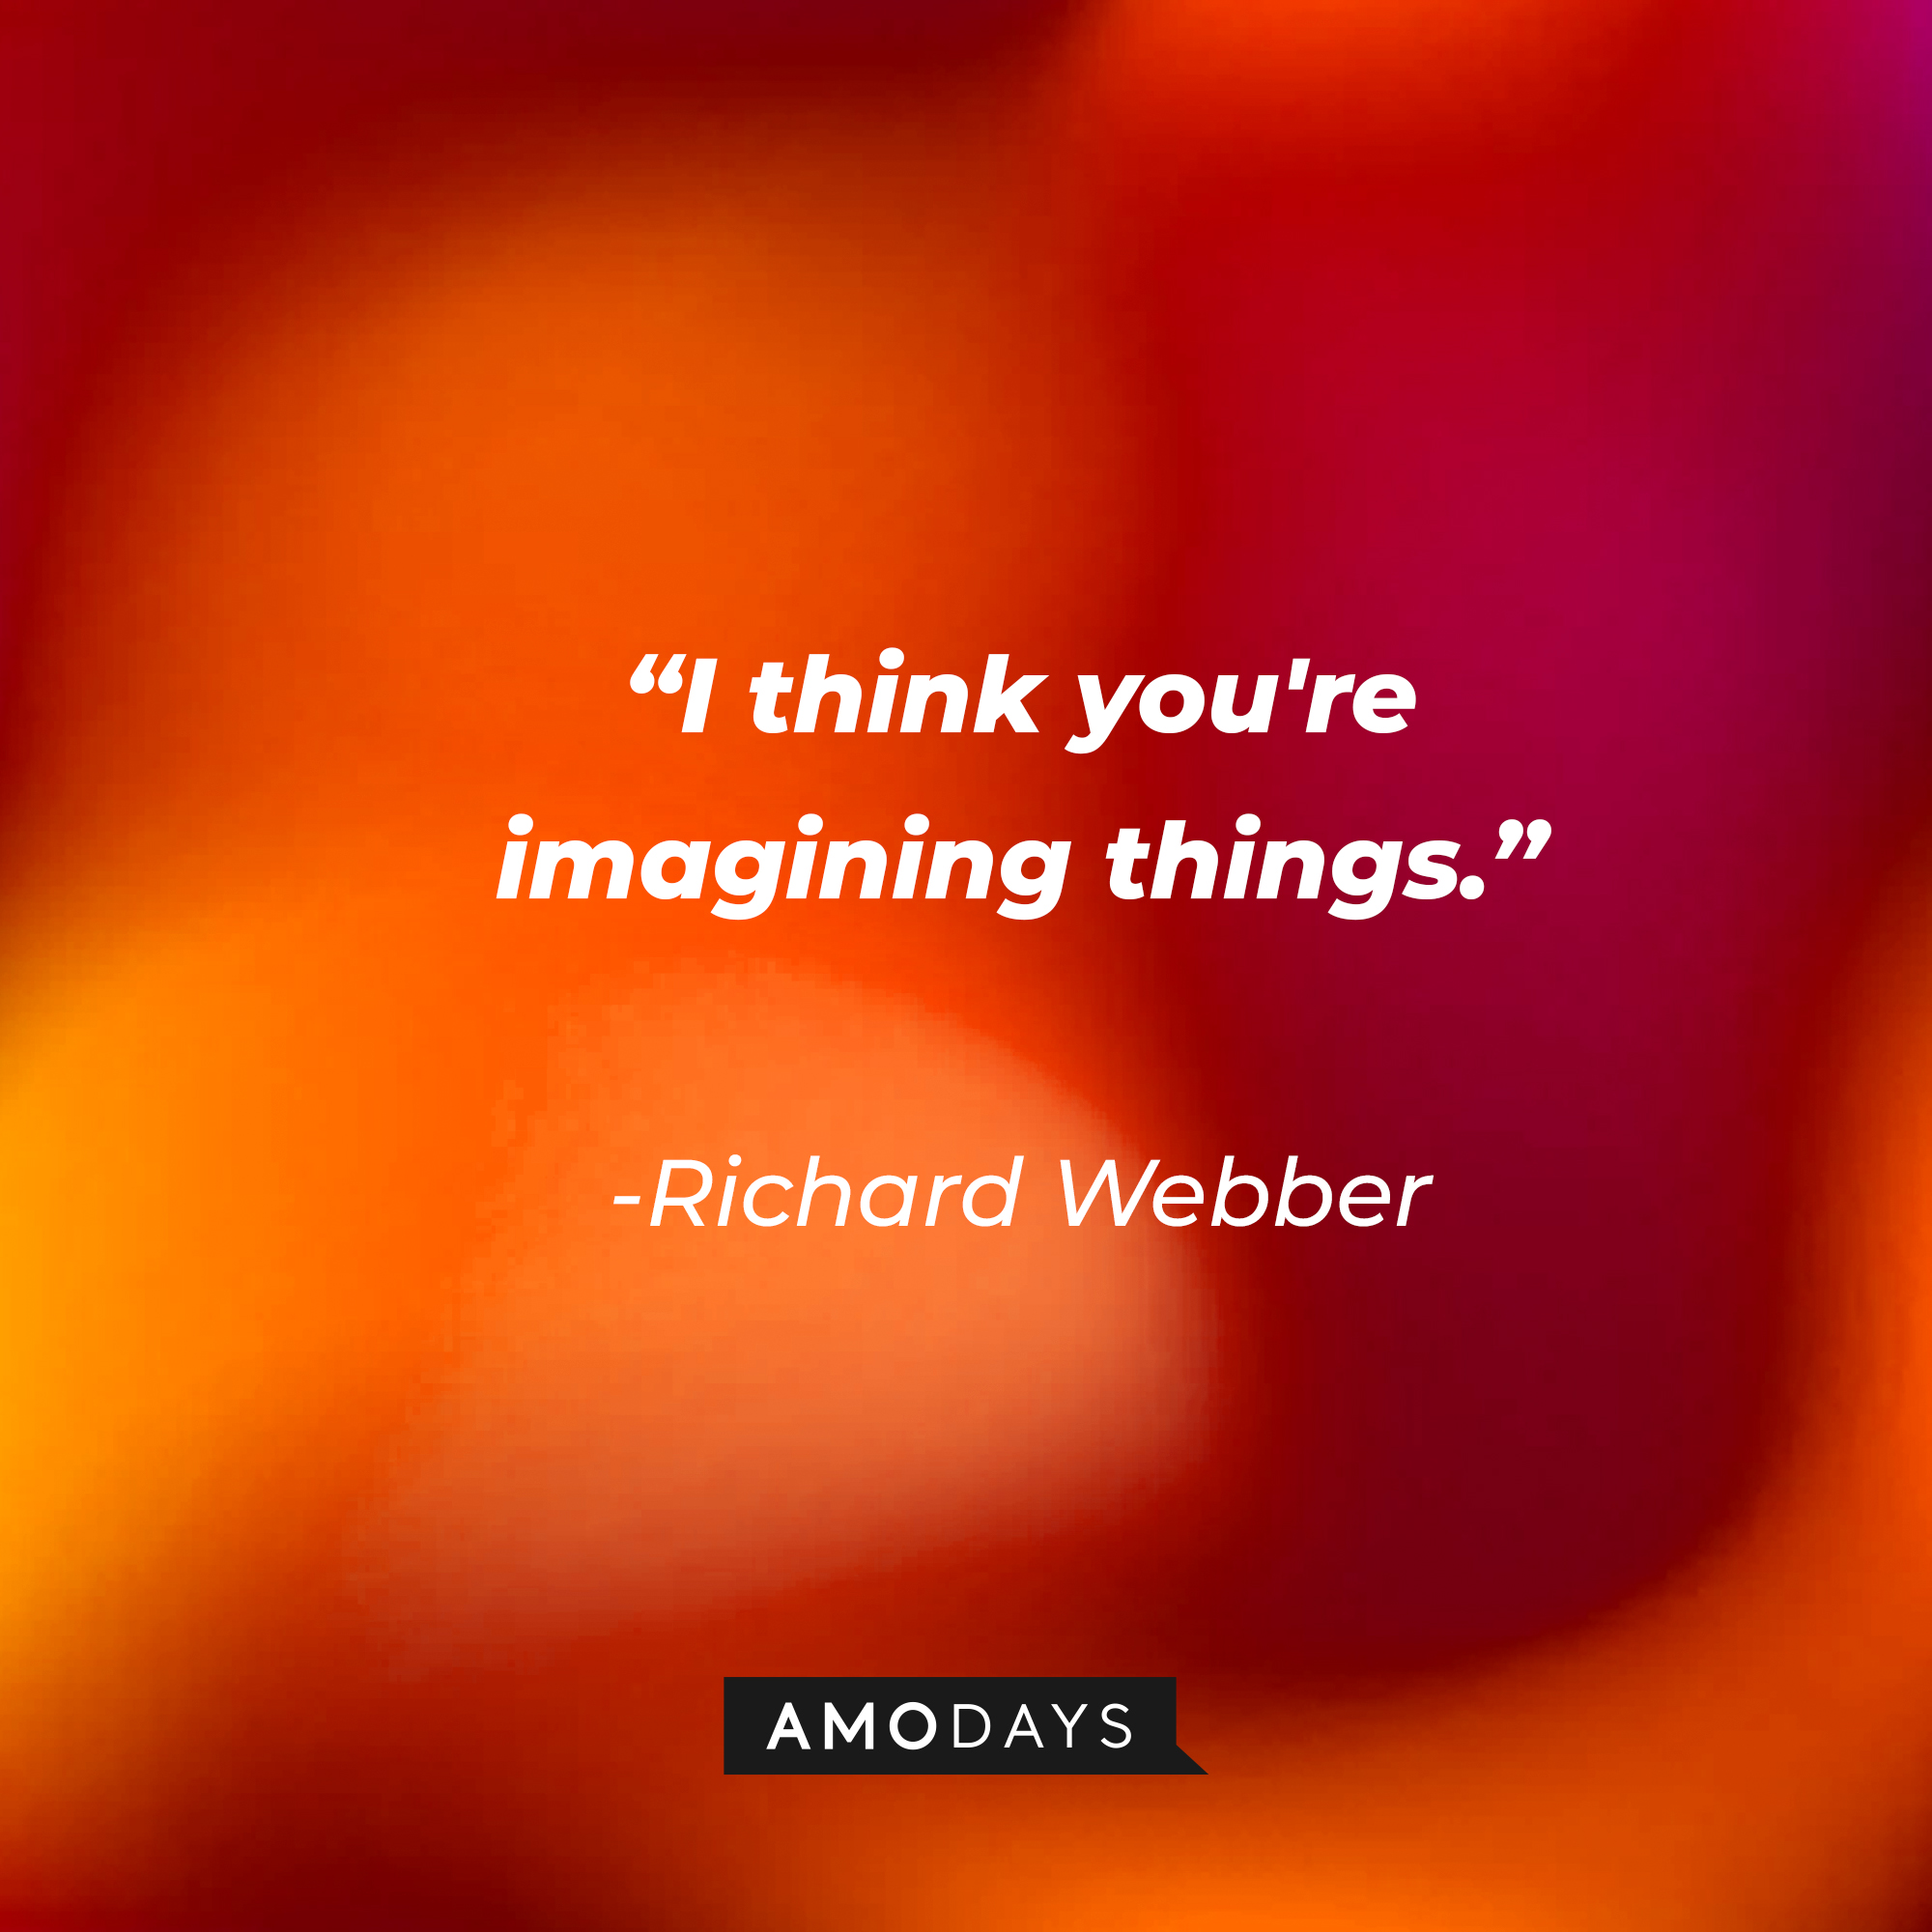 Richard Webber with his quote: "I think you're imagining things." | Source: Amodays